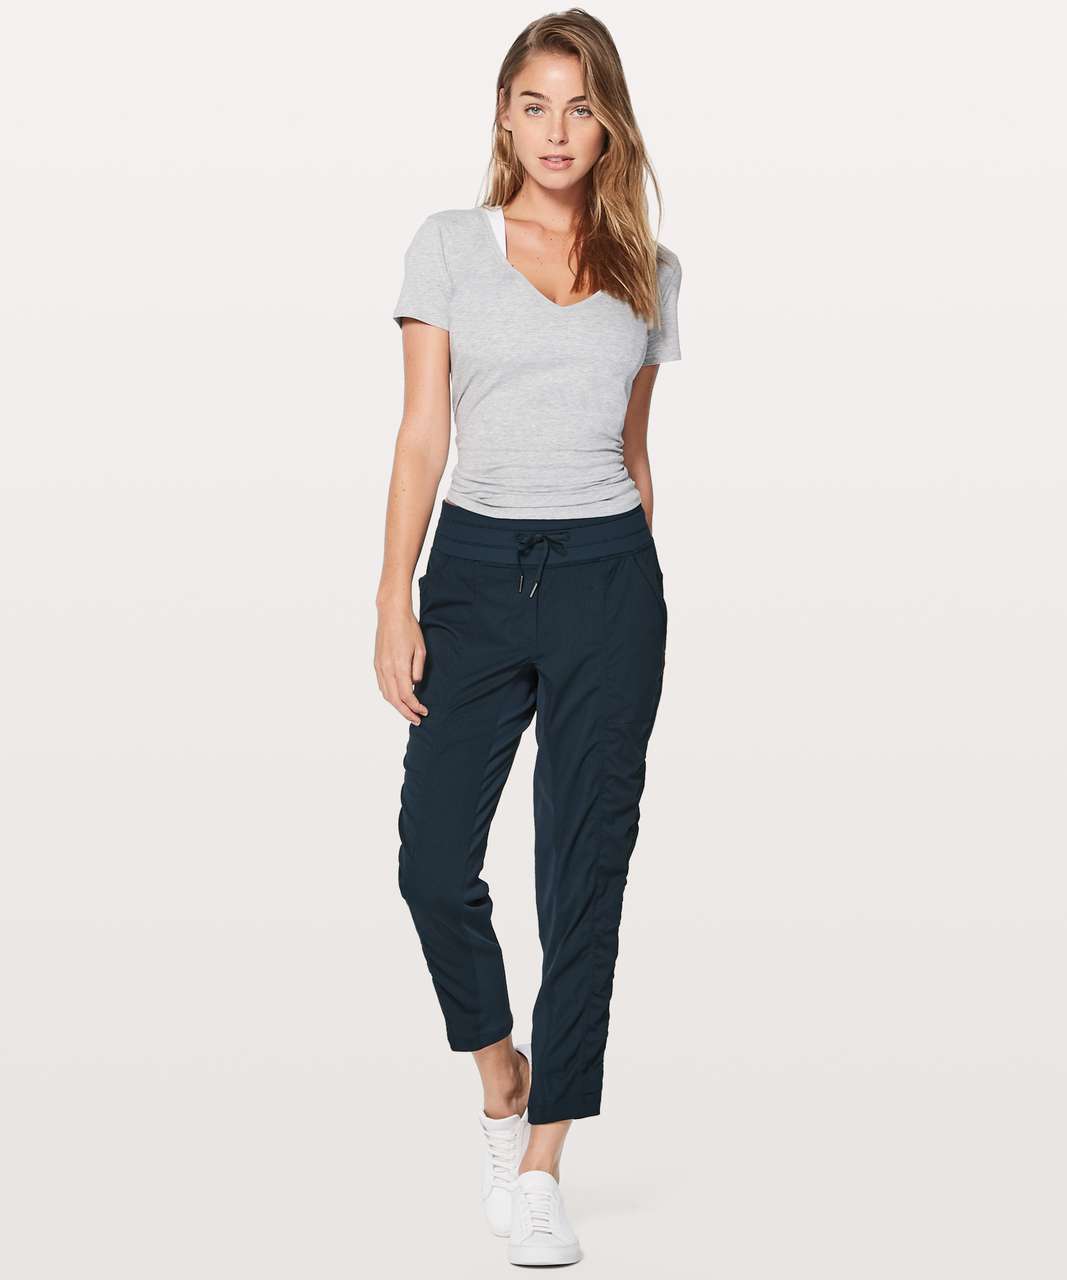 Lululemon Street To Studio Pant II Deep Zinfandel Size 12 - In New Con -  clothing & accessories - by owner - craigslist